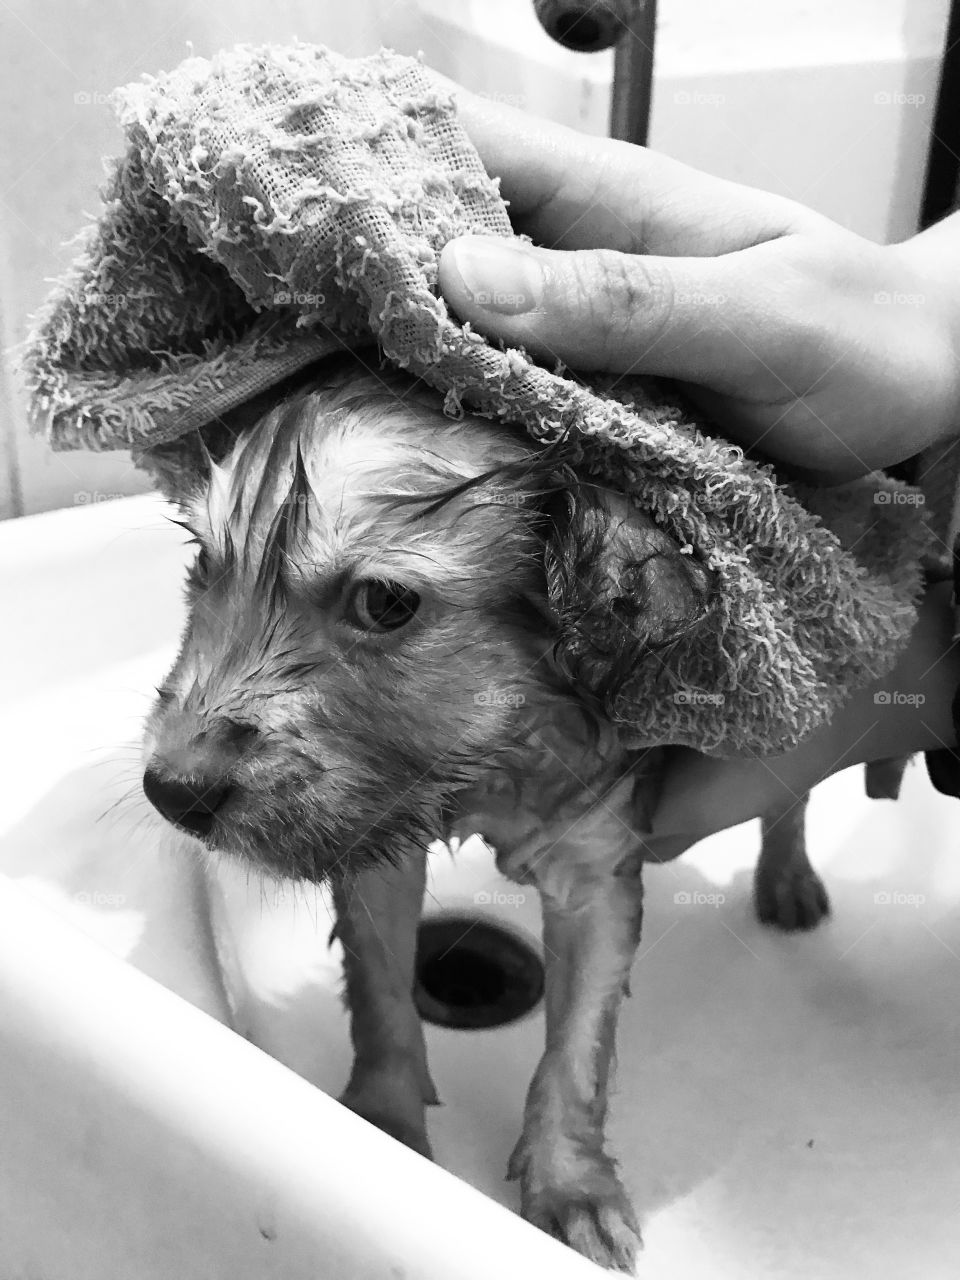 "This is my first official bath. Cheer on me! It's cold! Arf!" - Chewy